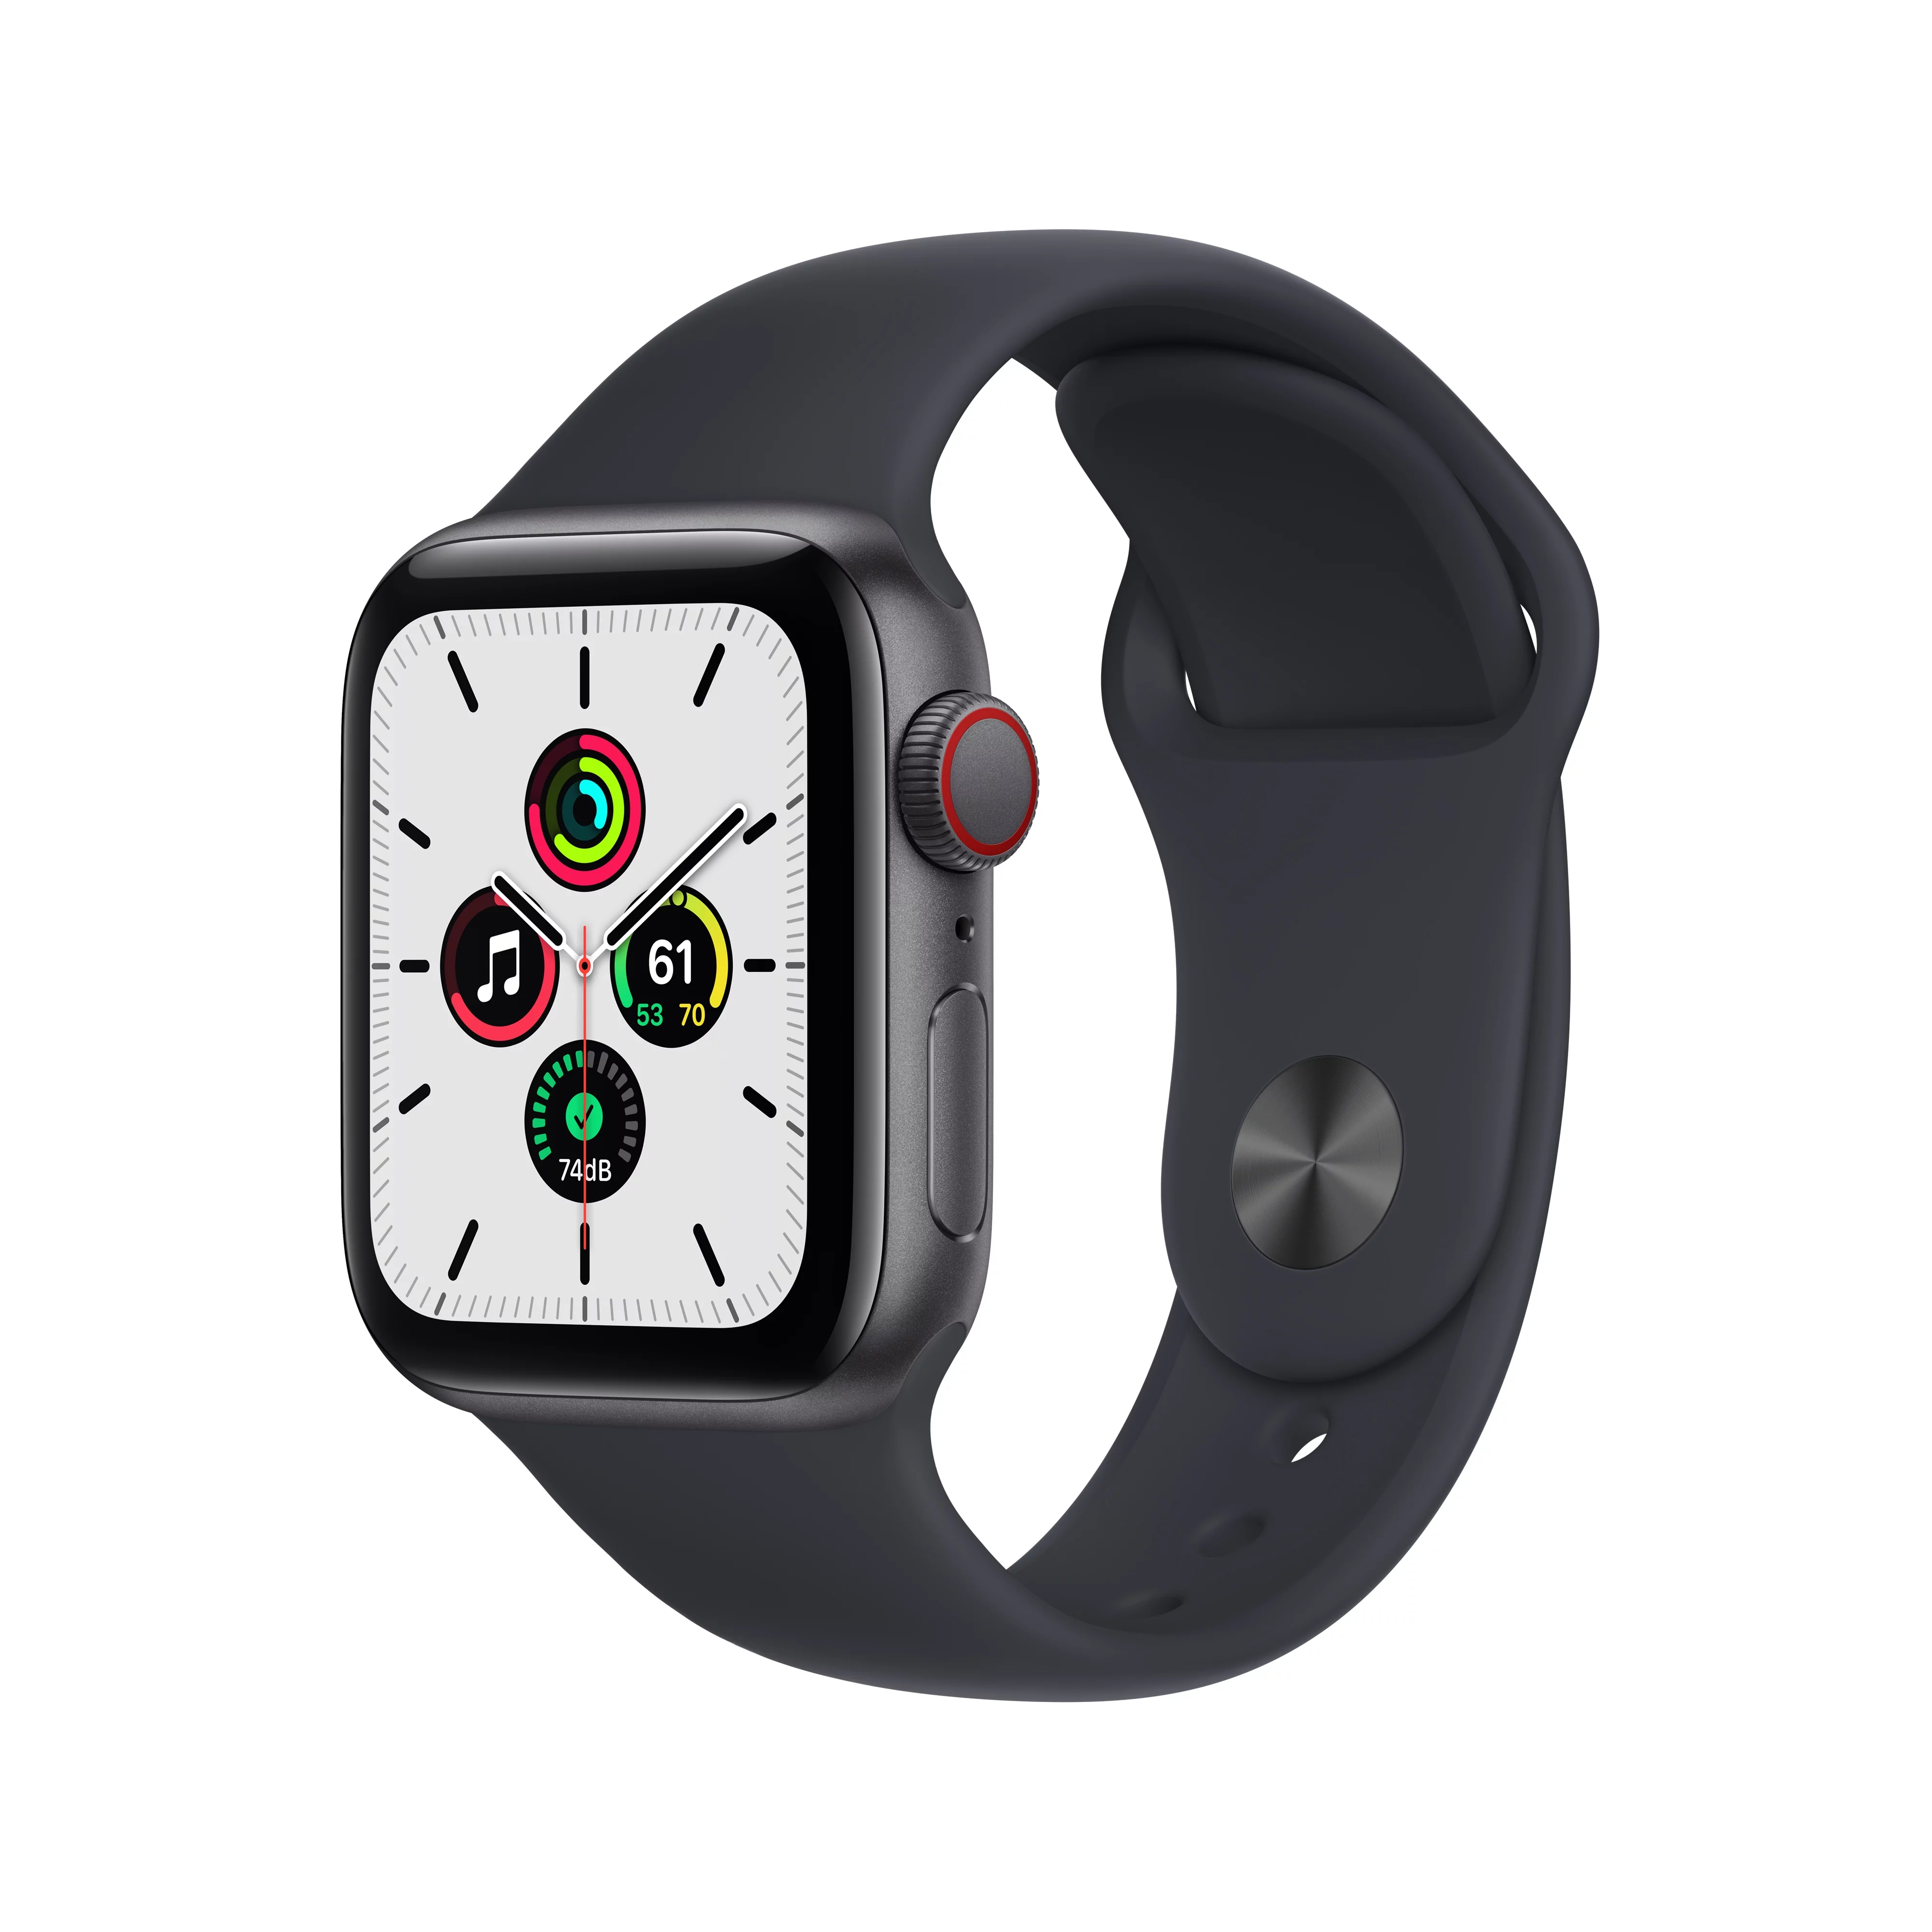 Apple Watch SE (1st Gen) GPS + Cellular 40mm Space Gray Aluminum Case Midnight Sport Band - Regular with Family Set Up